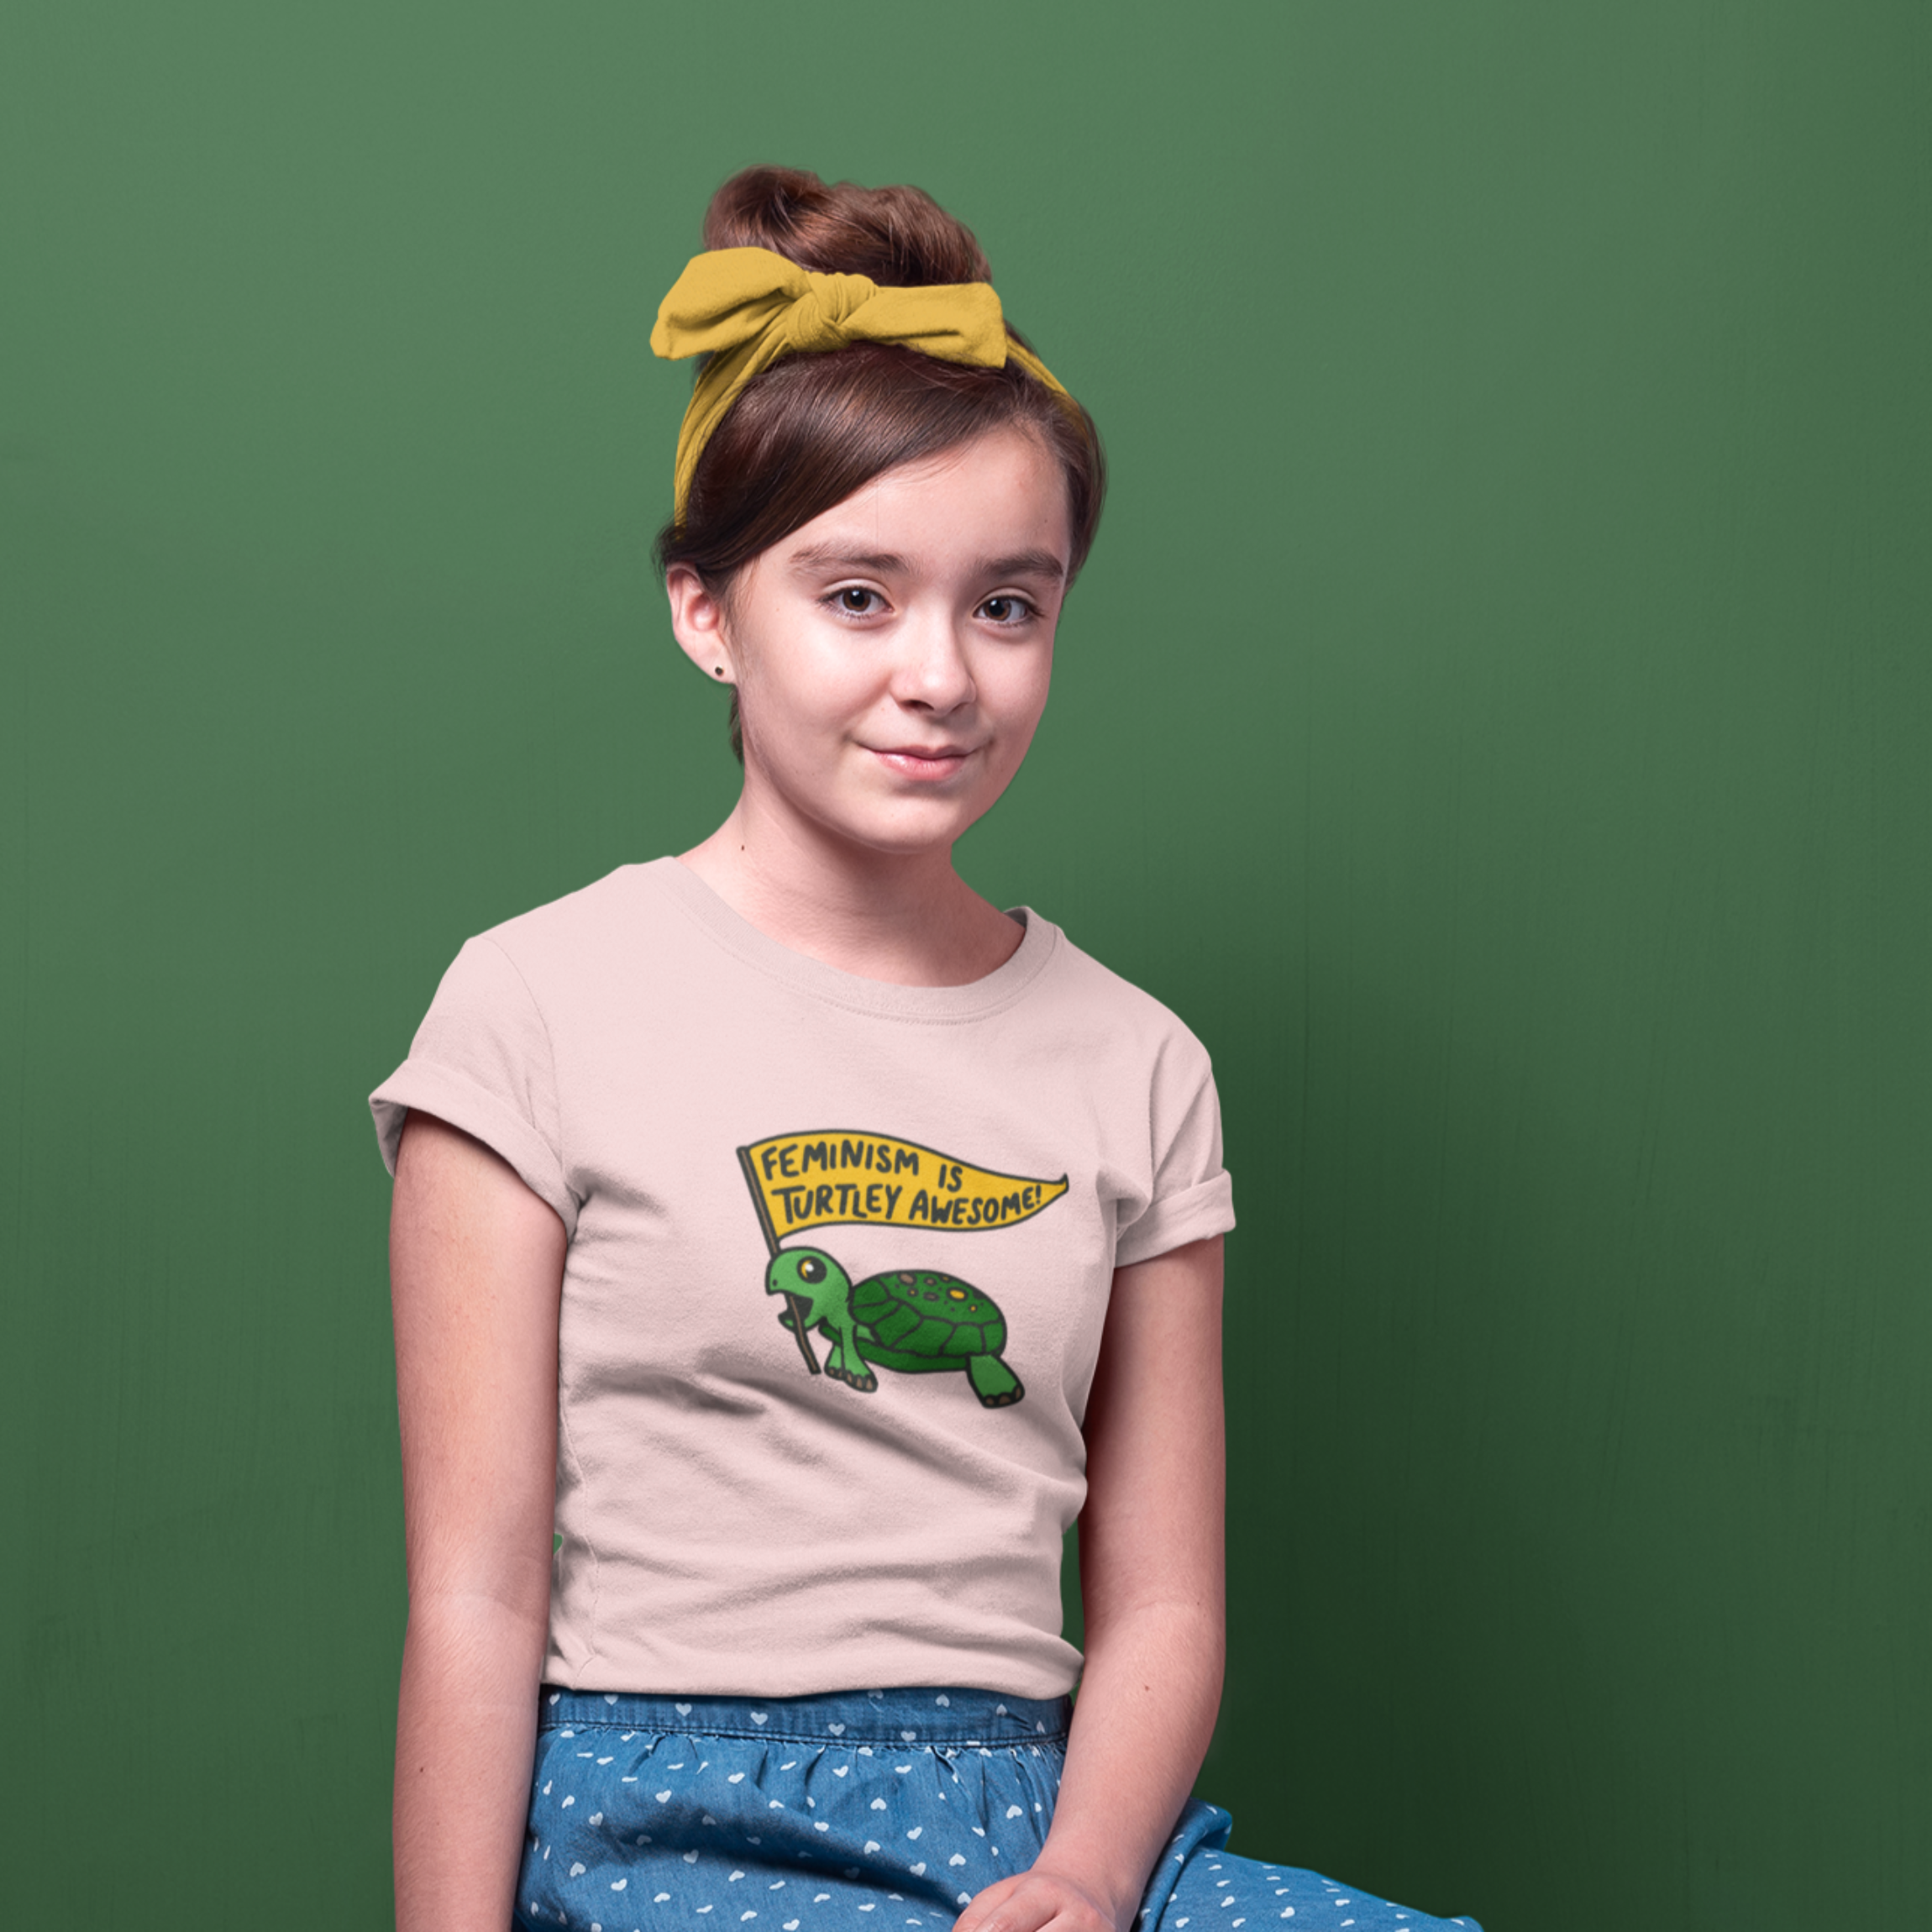 girl with headband wearing peach shirt with "Feminism Is Turtley Awesome" design